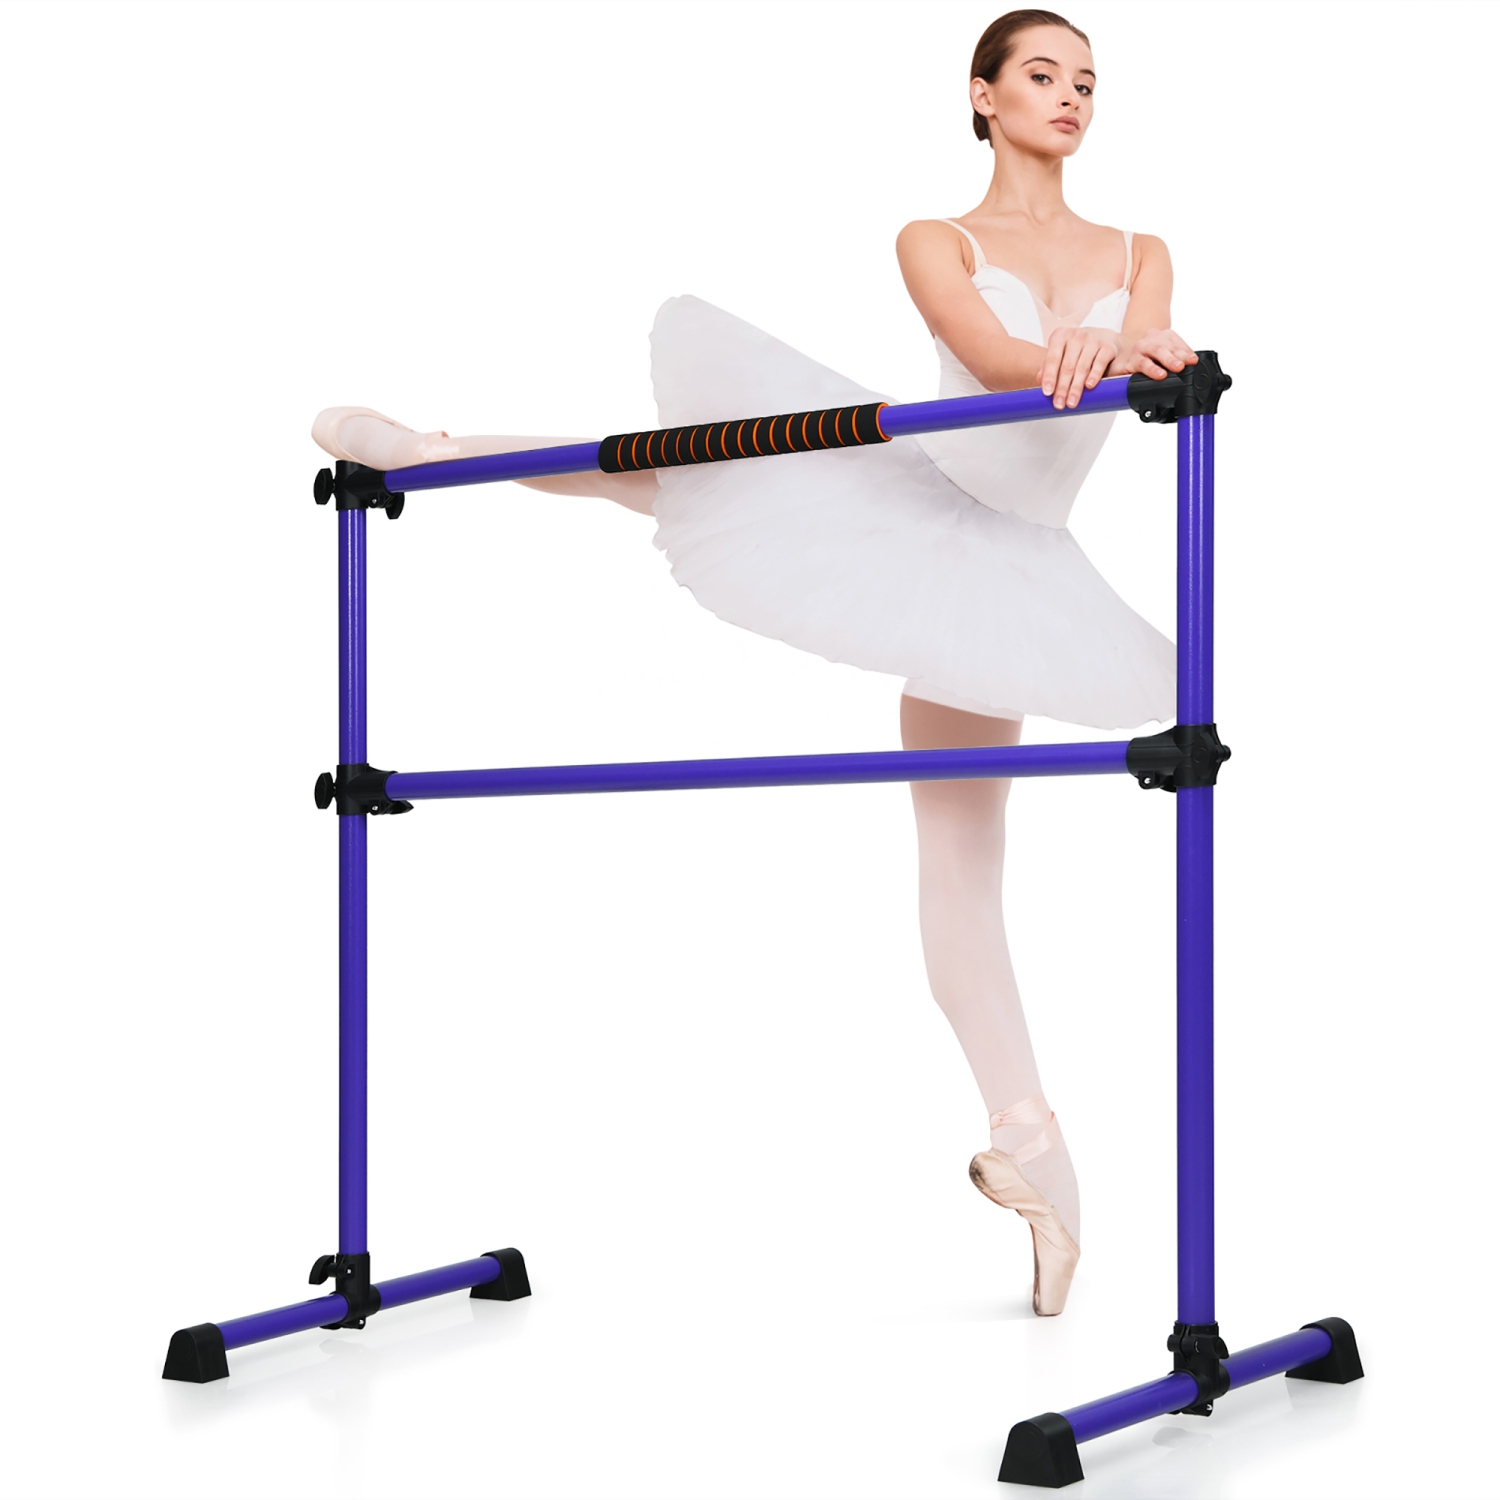 PortaBarre 4.5' Portable Ballet Barre (Special Order) – The London